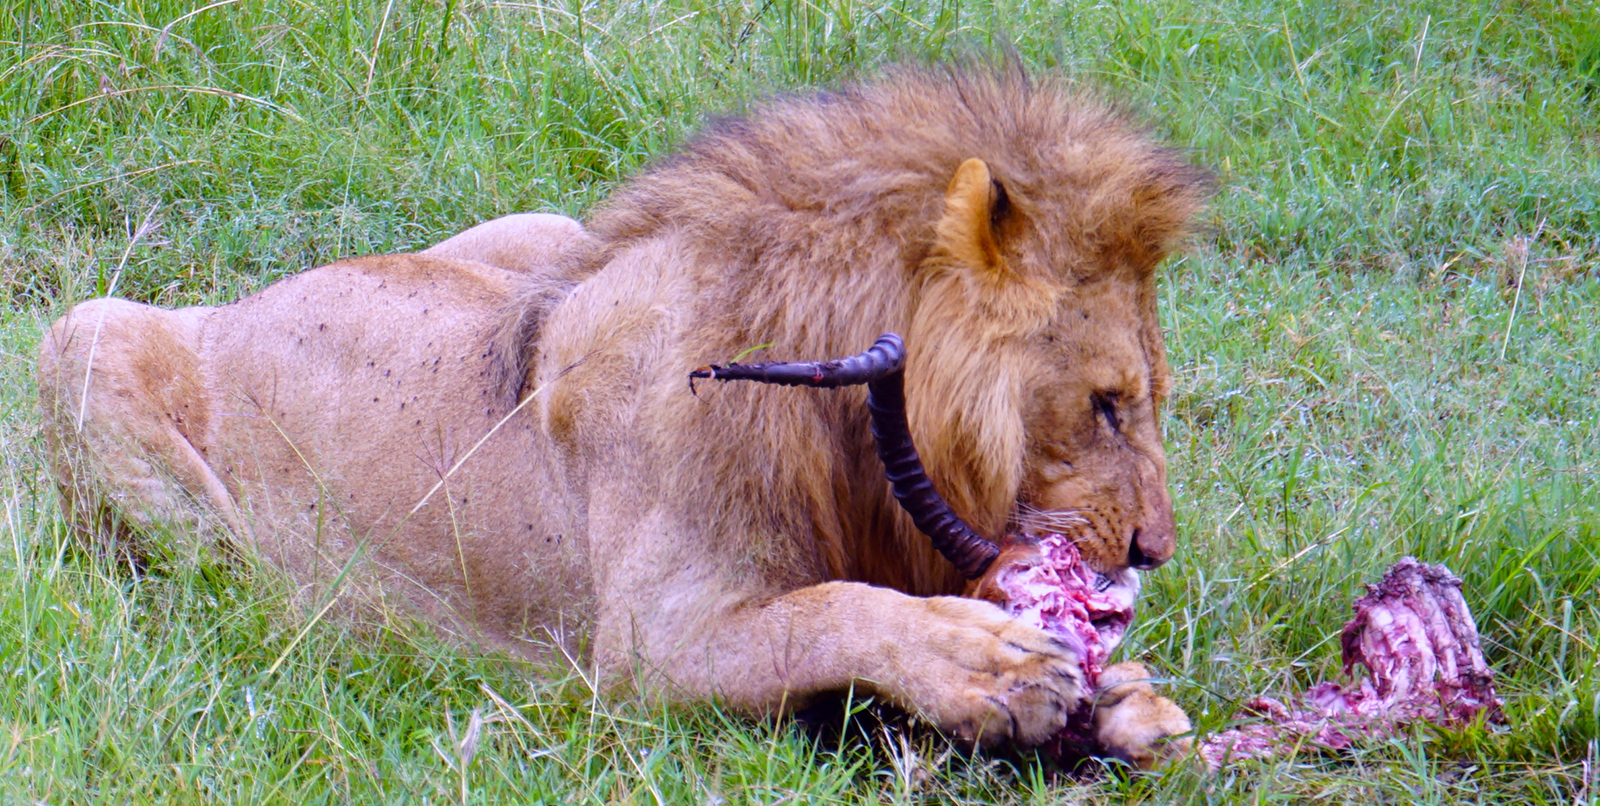 We caught this lion having a snack in the morning